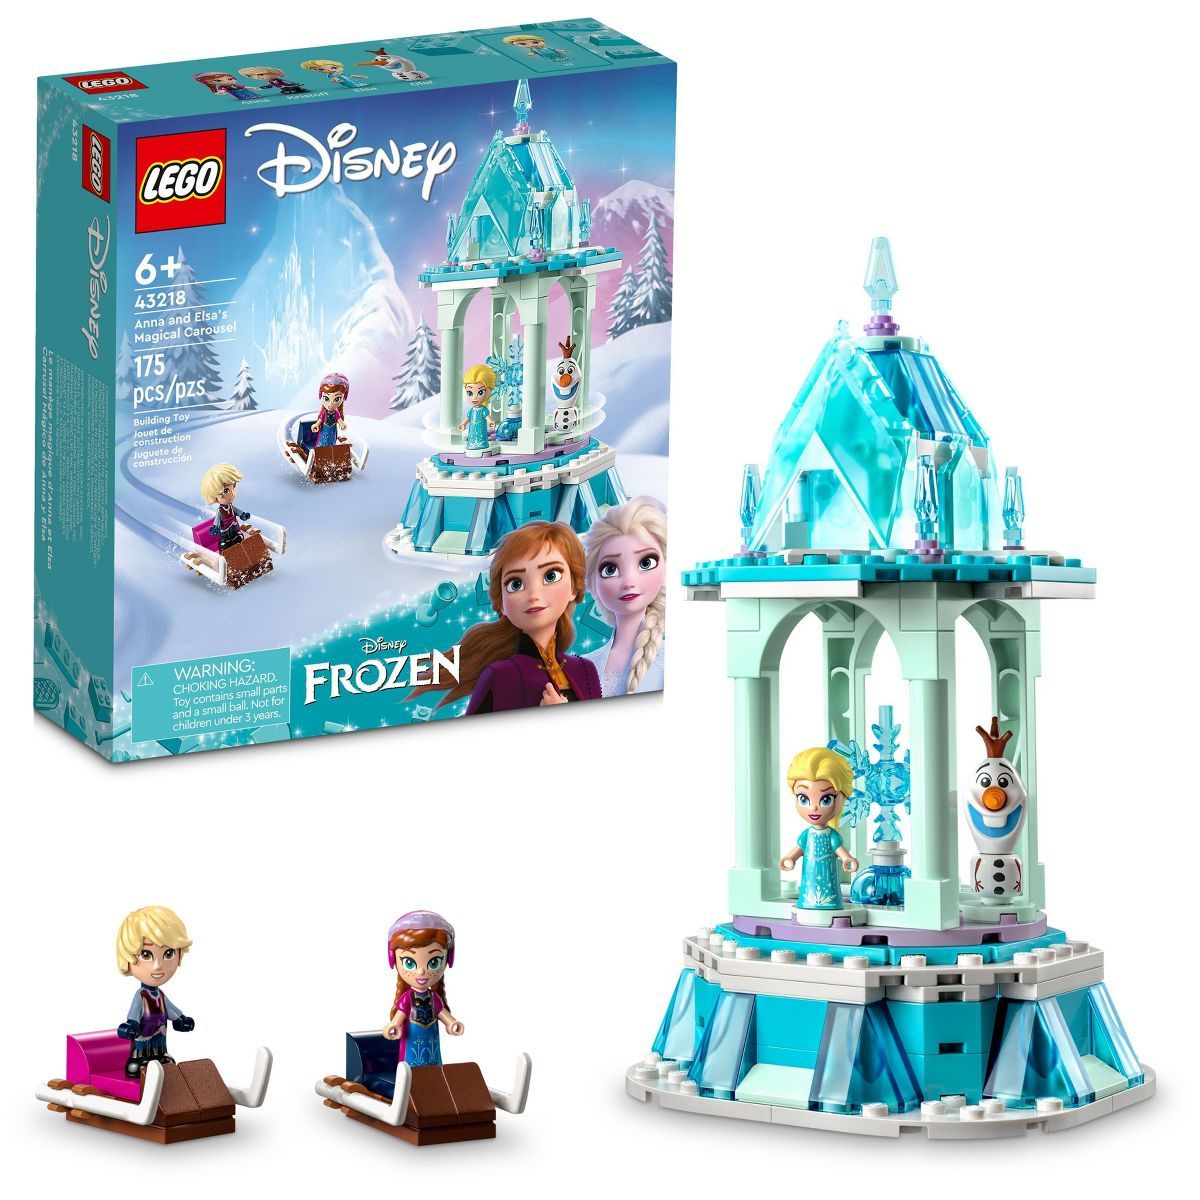 LEGO Disney Frozen Anna and Elsa's Magical Carousel Building Toy Set 43218 | Target